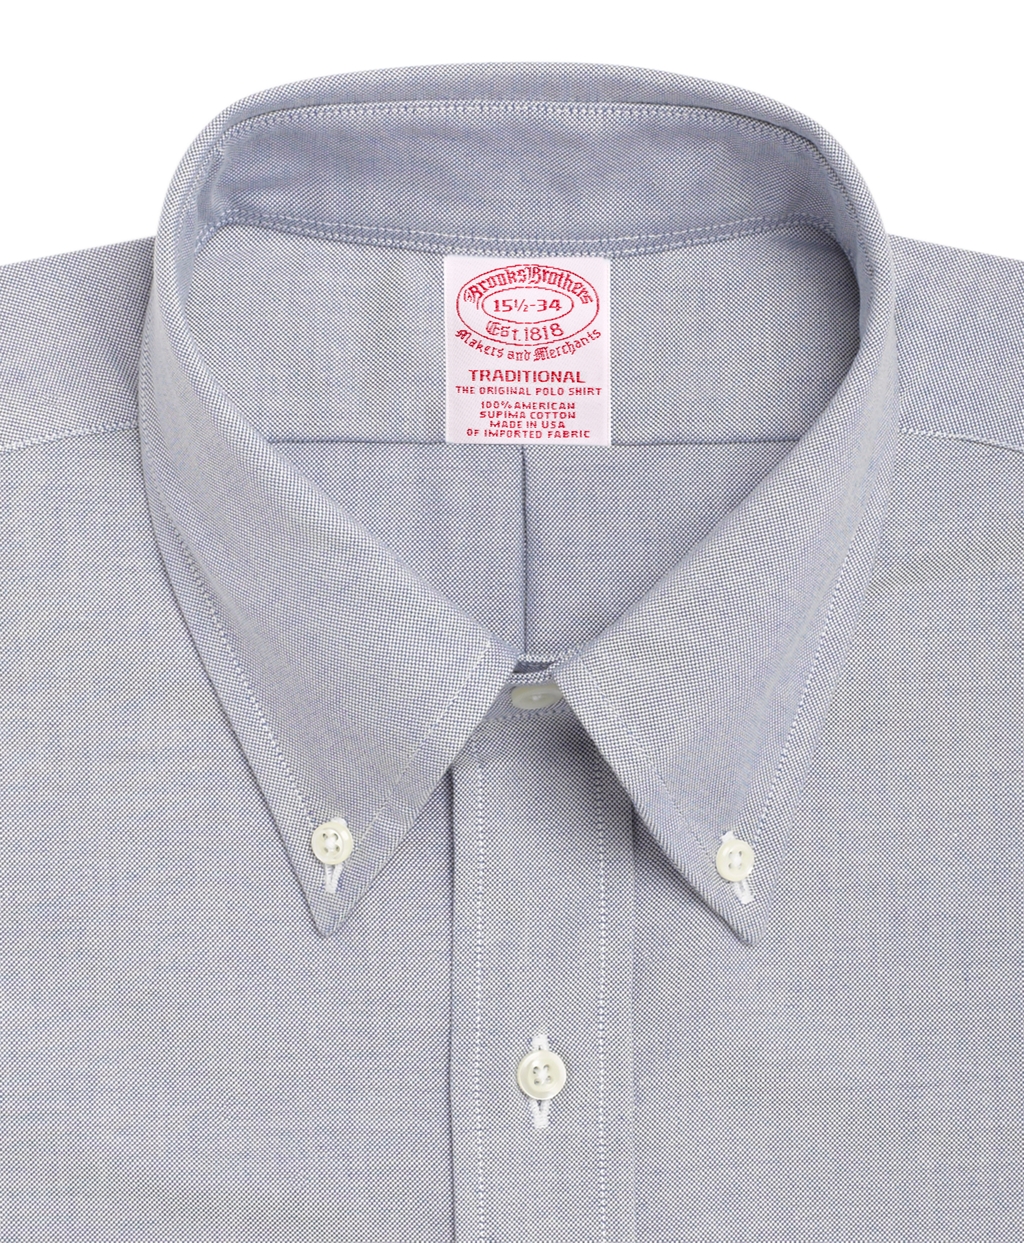 Brooks Brothers label. | Men's Clothing Forums